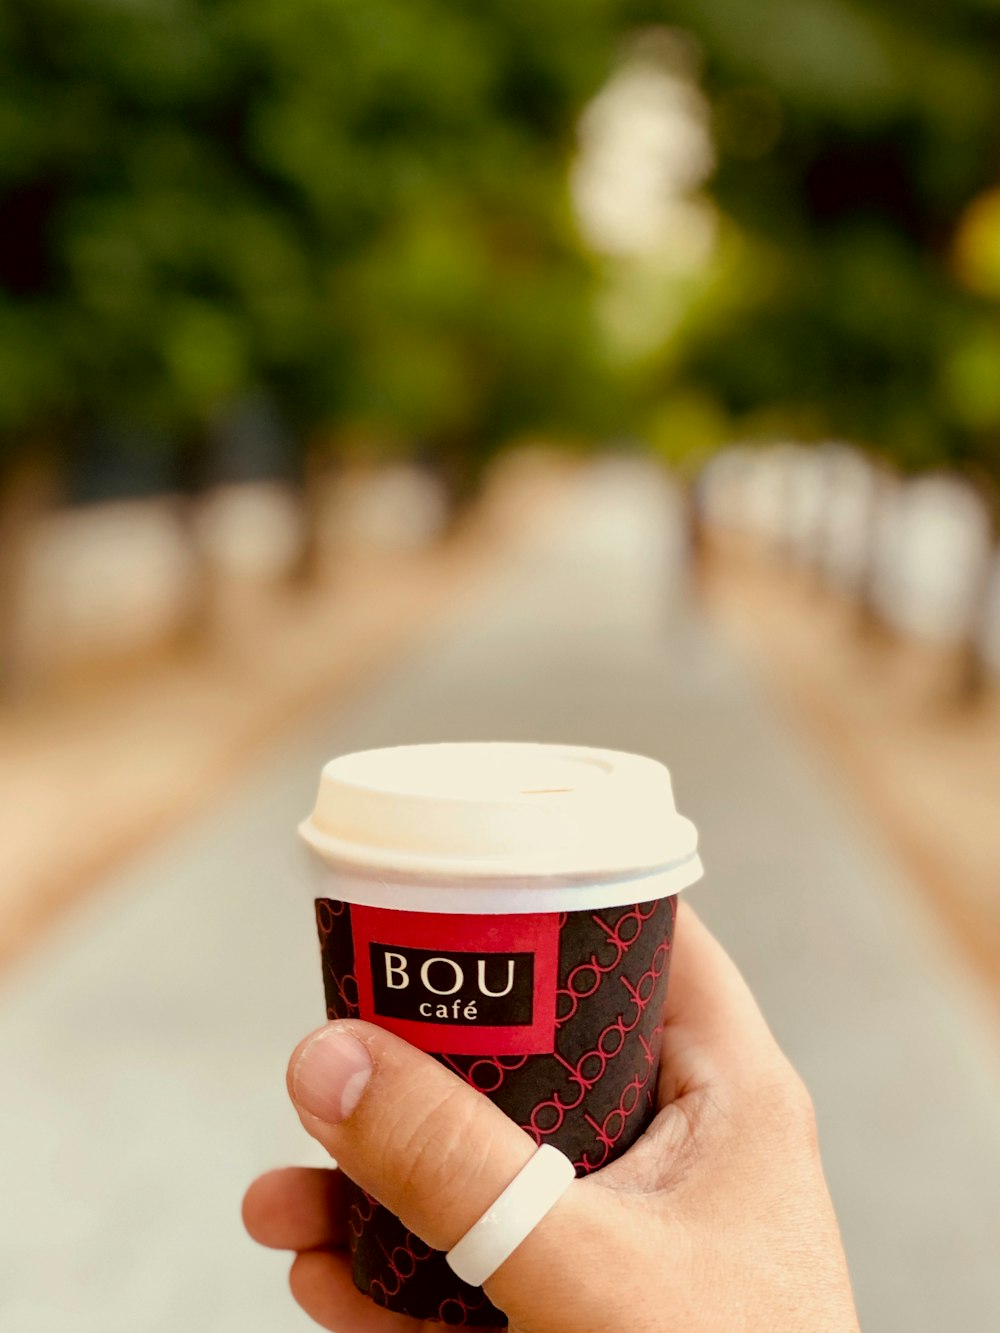 Bou cafe cup